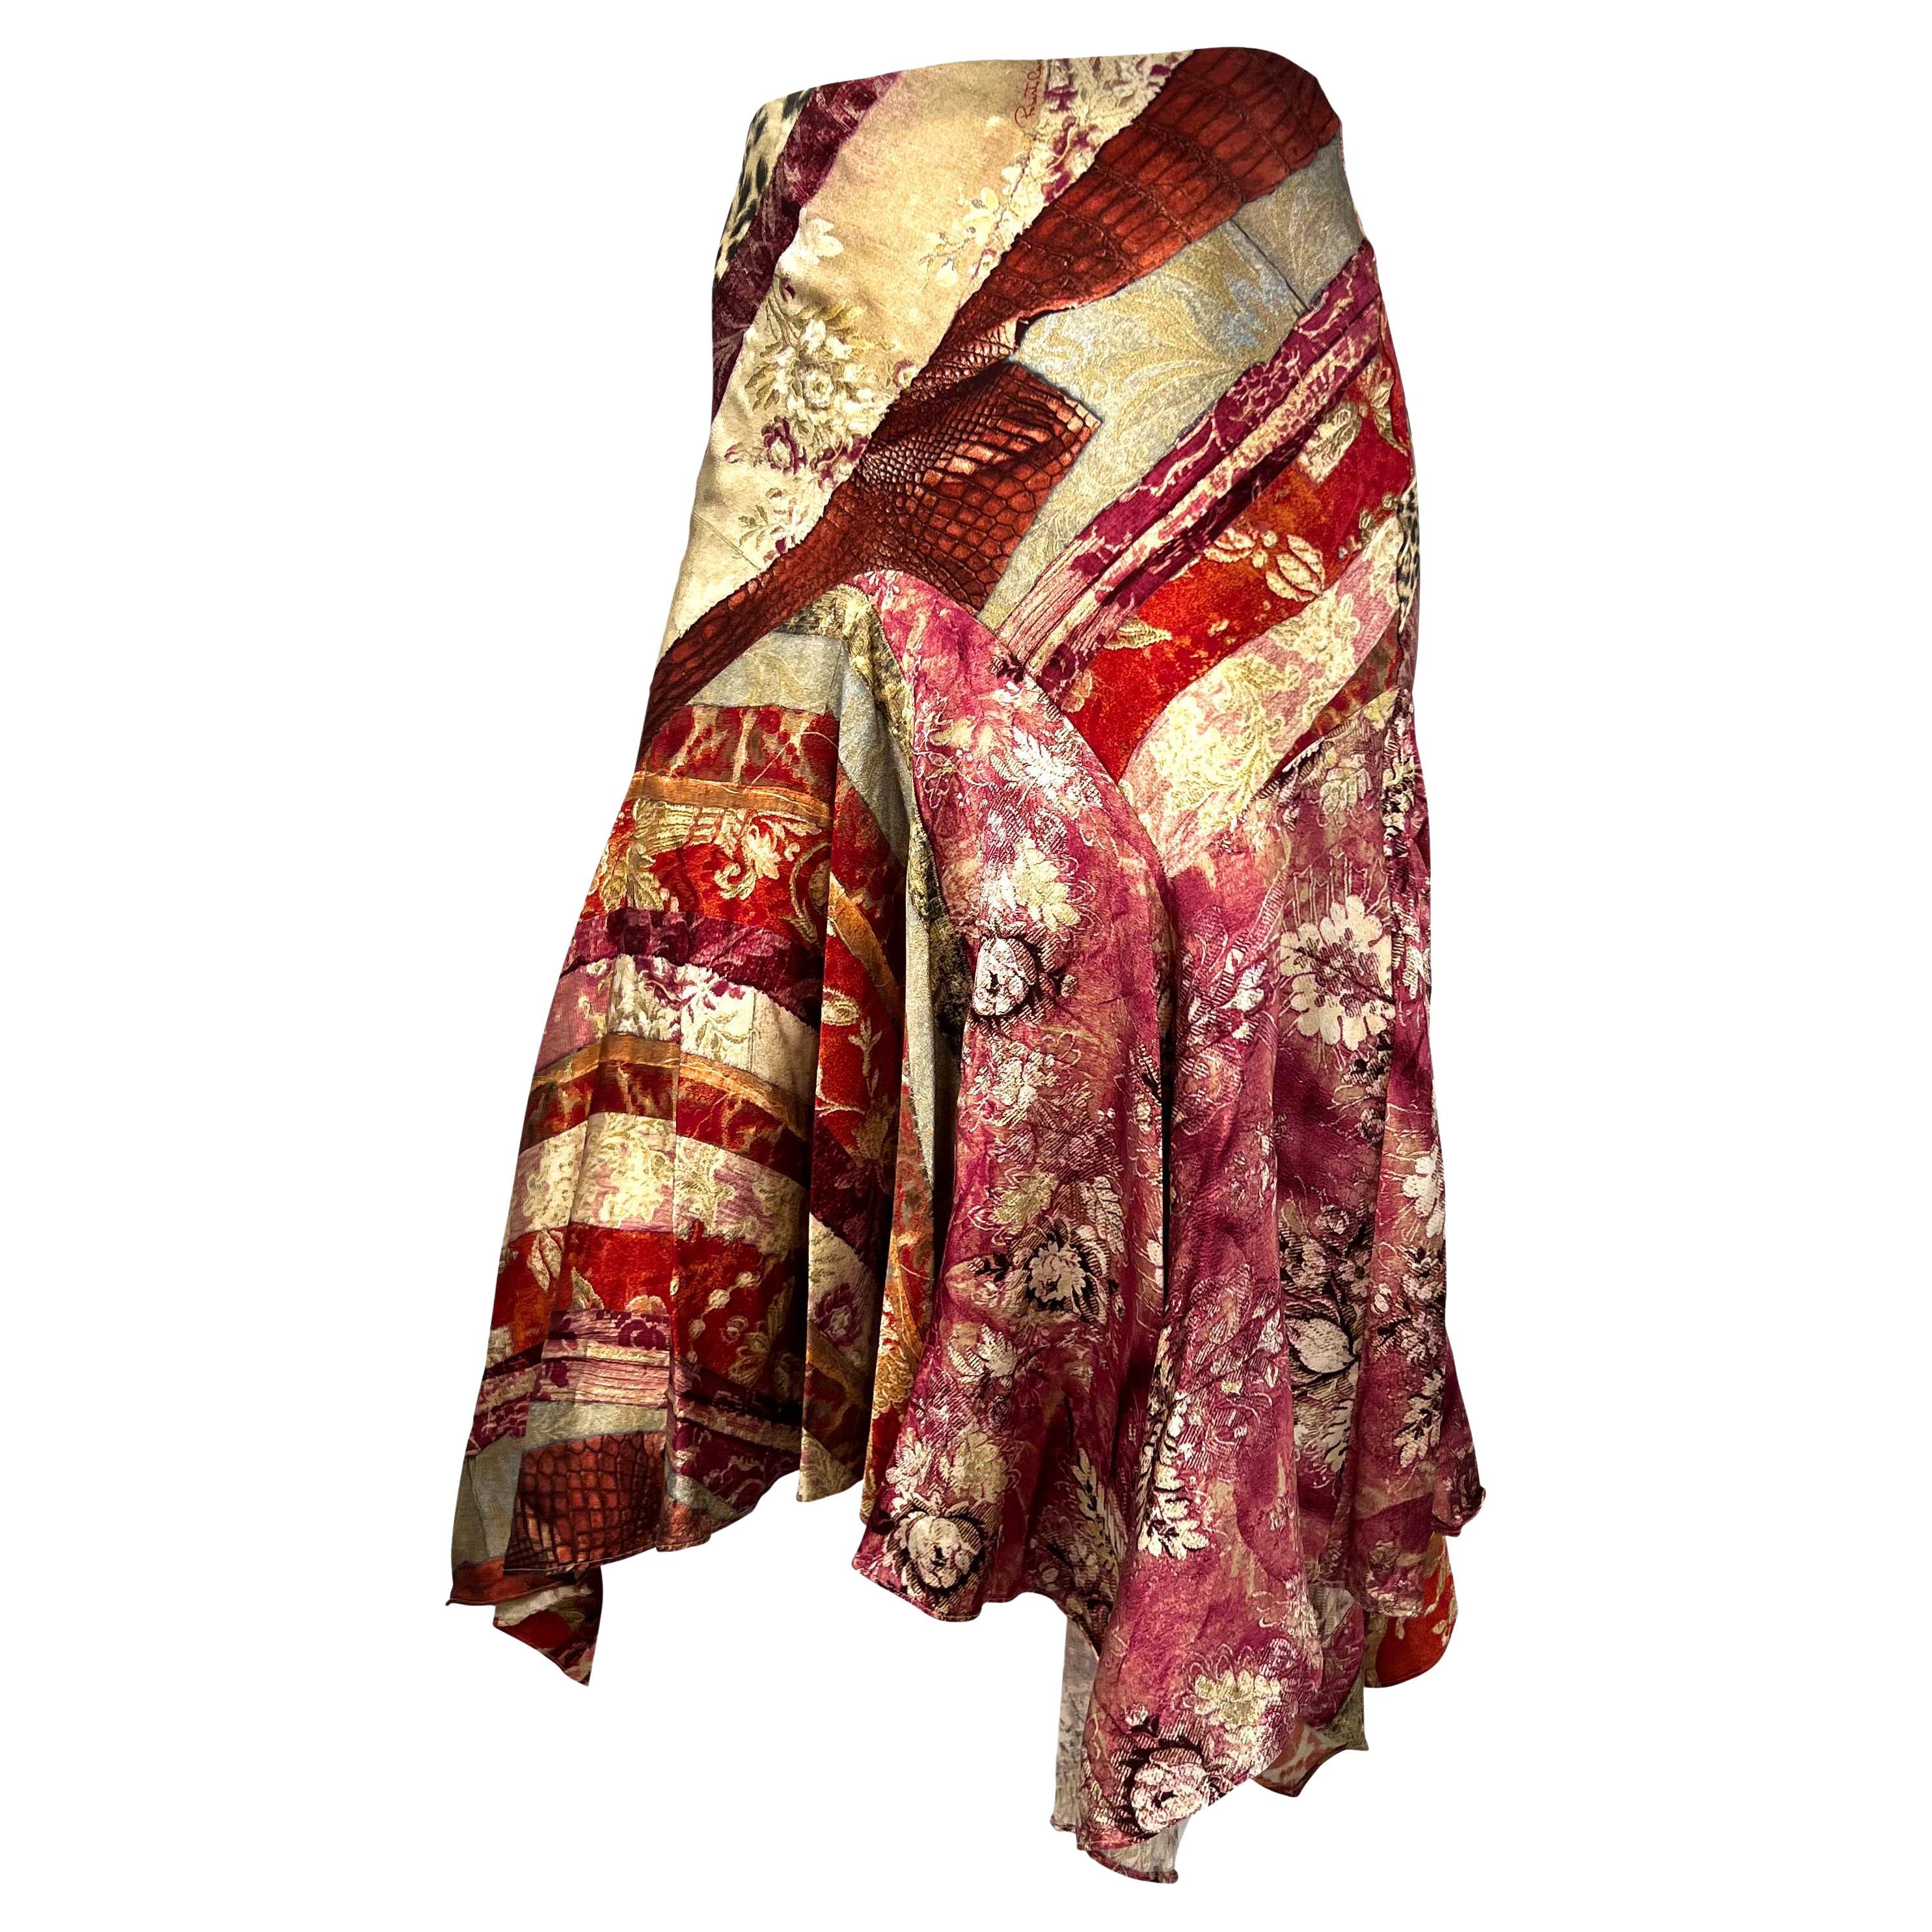 Presenting a silk flared skirt designed by Roberto Cavalli in 2005. This piece is covered in a detailed red and beige trompé-l'œil pattern depicting strips of contrasting materials and prints. Add this delightfully busy skirt to your closet or